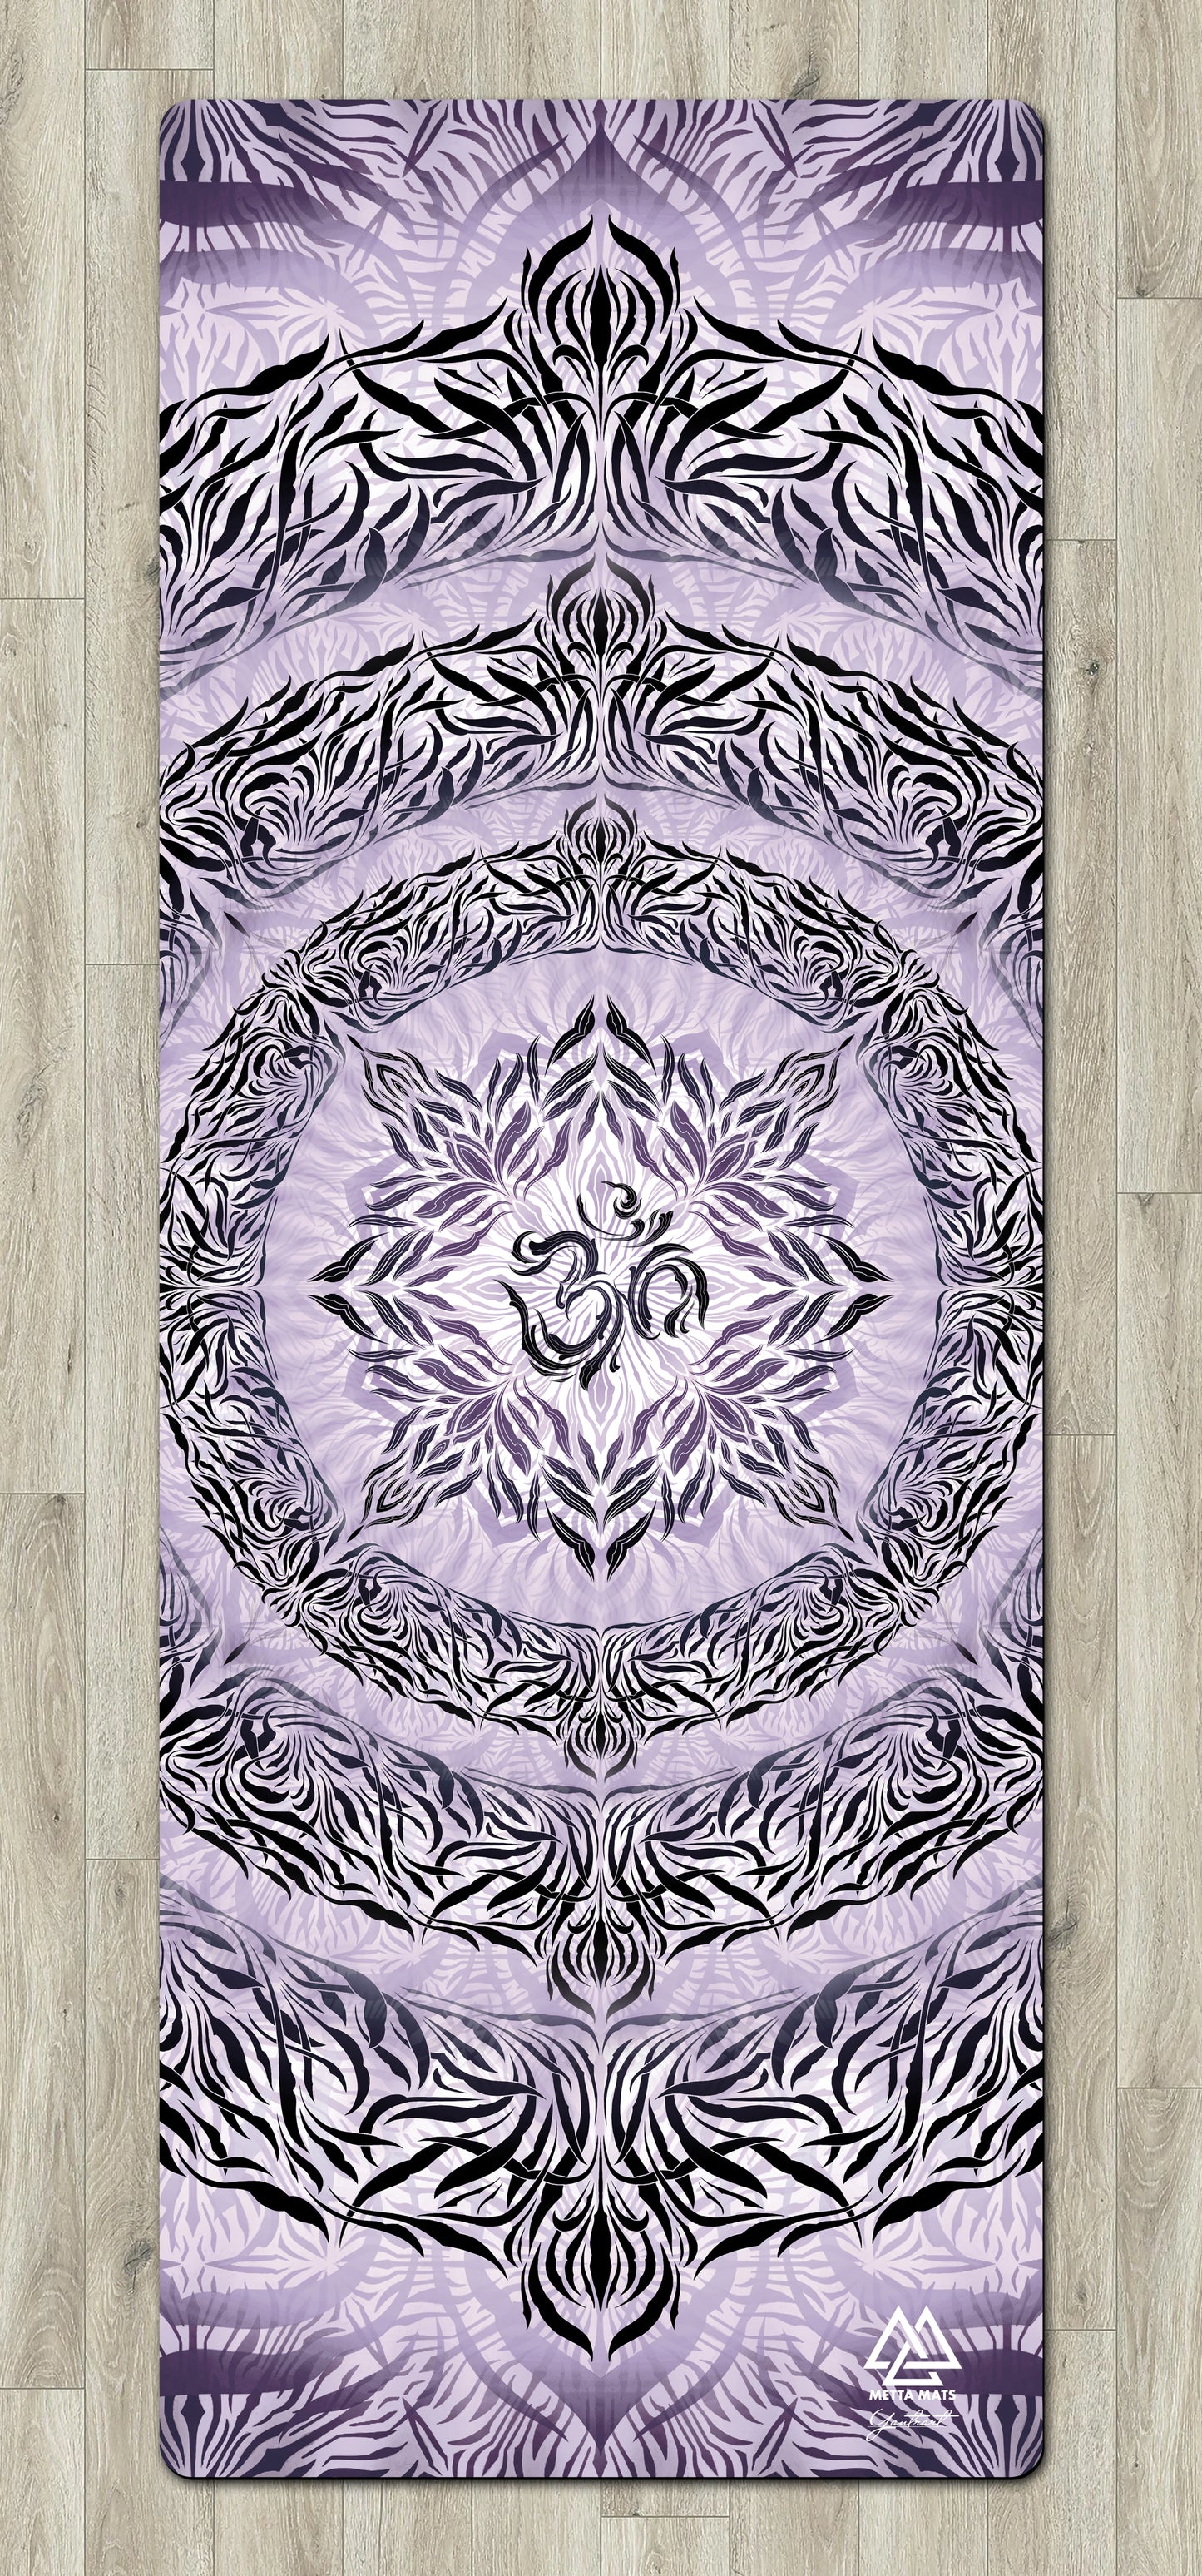 "The Mighty Om" Yoga Mat